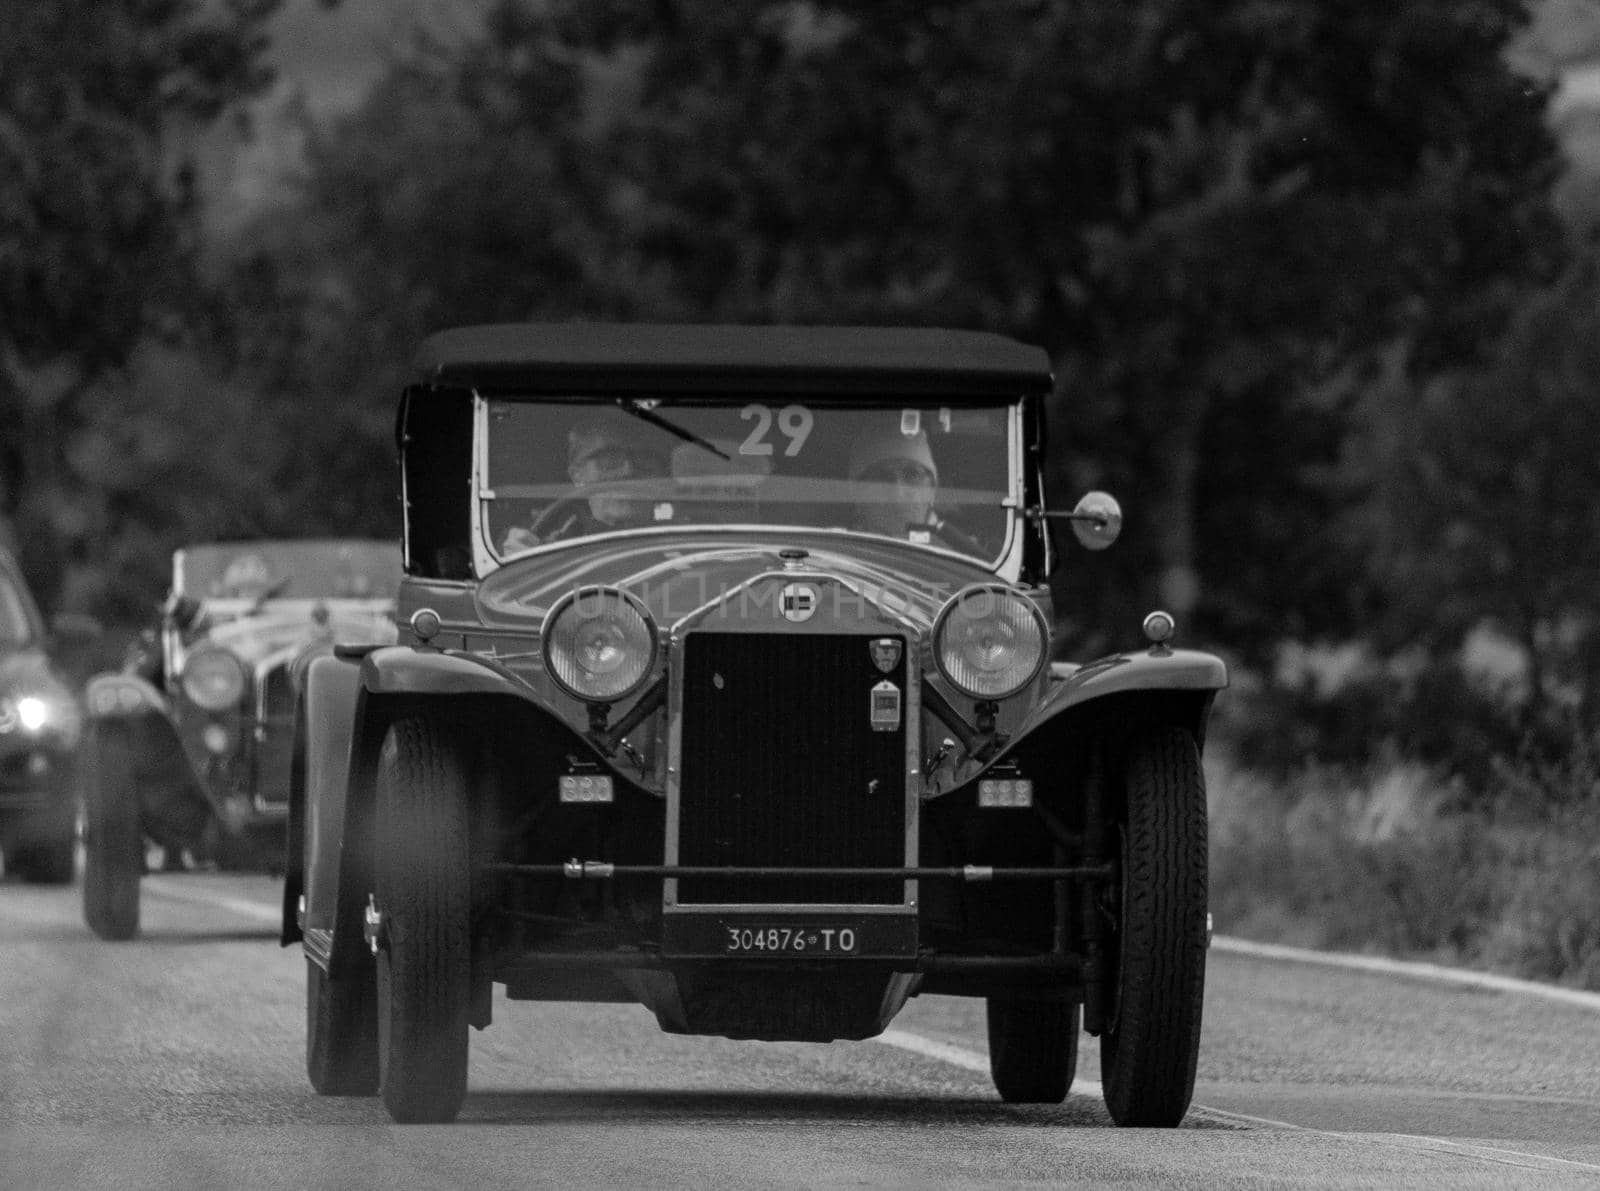 LANCIA LAMBDA SPIDER CASARO 1927 on an old racing car in rally Mille Miglia 2020 the famous italian historical race (1927-1957) by massimocampanari